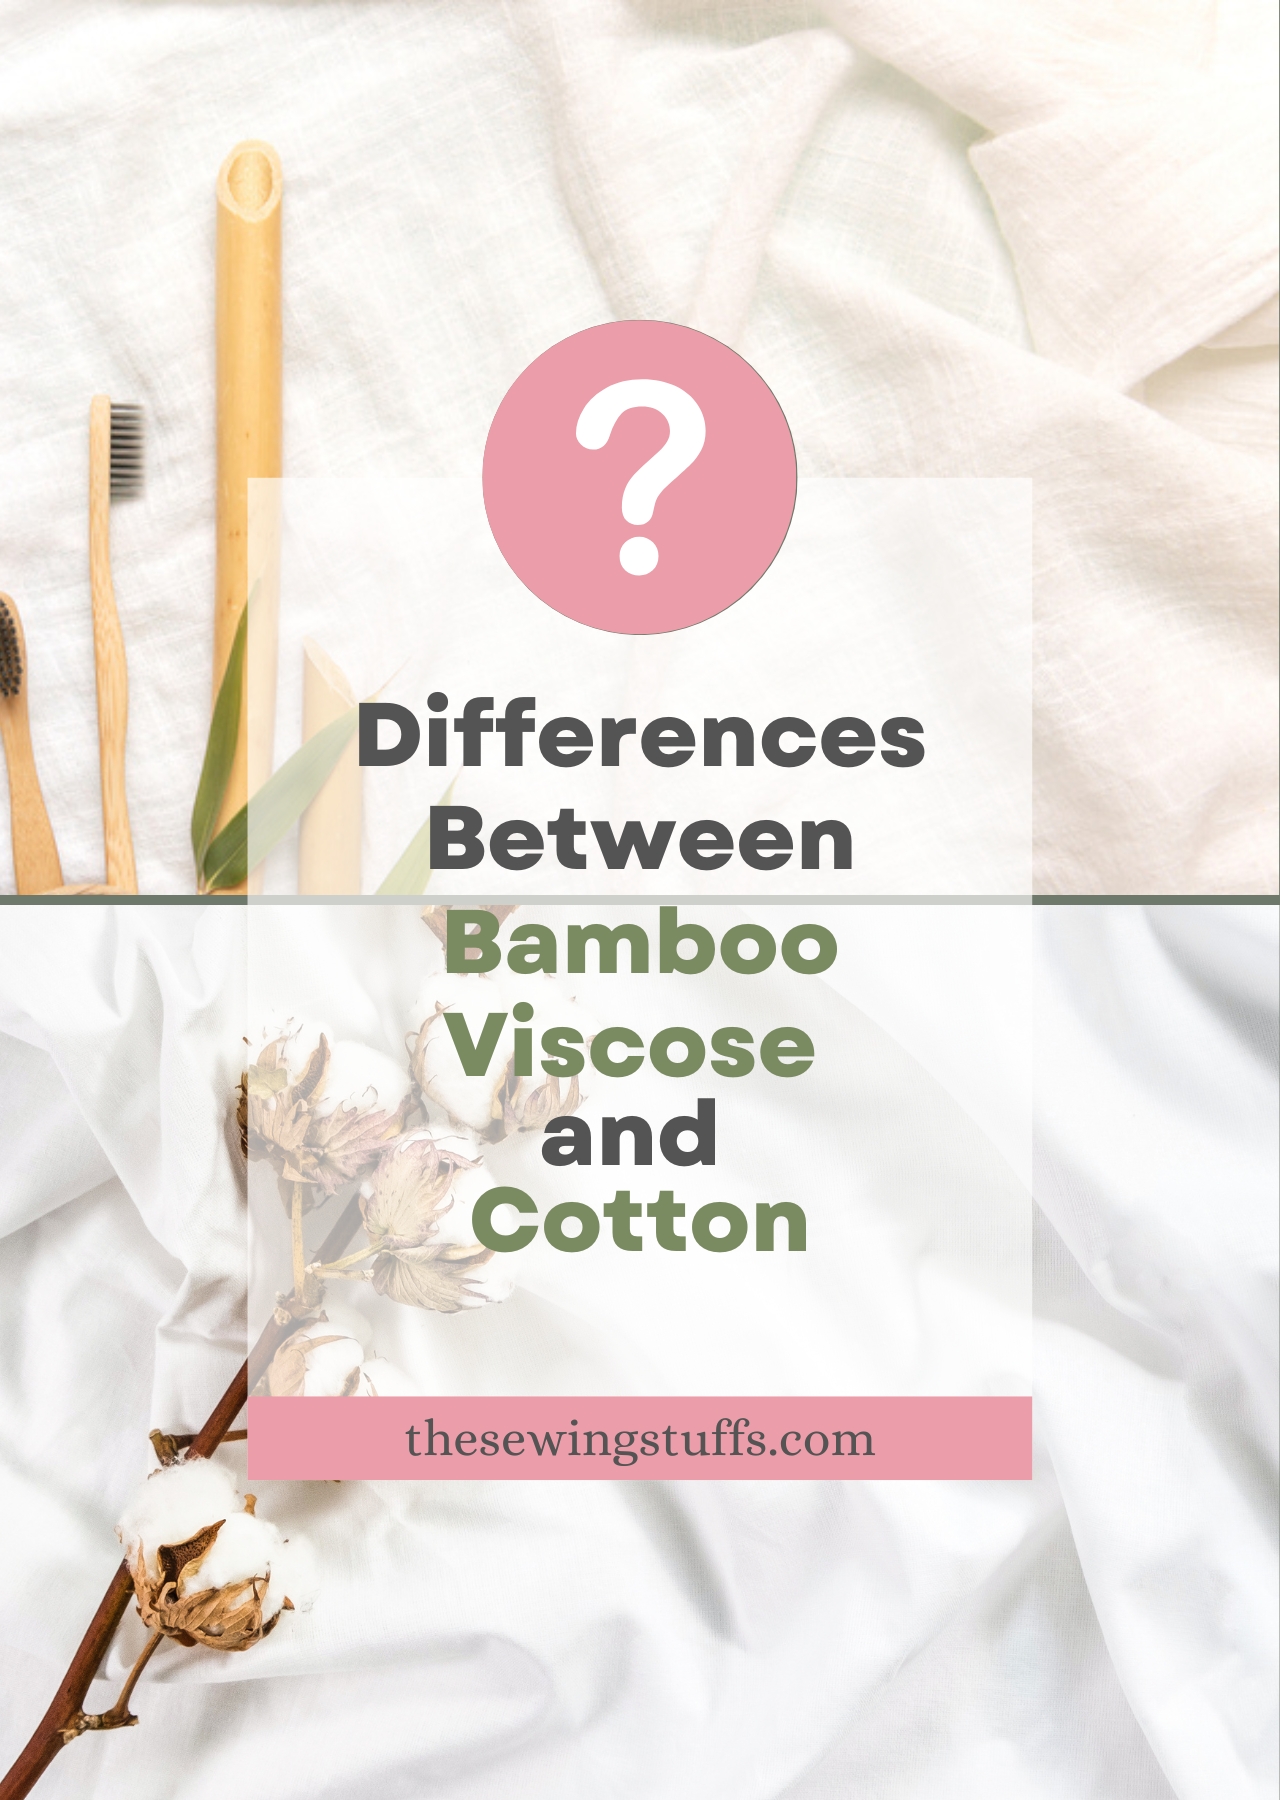 Differences Between Bamboo Viscose and Cotton